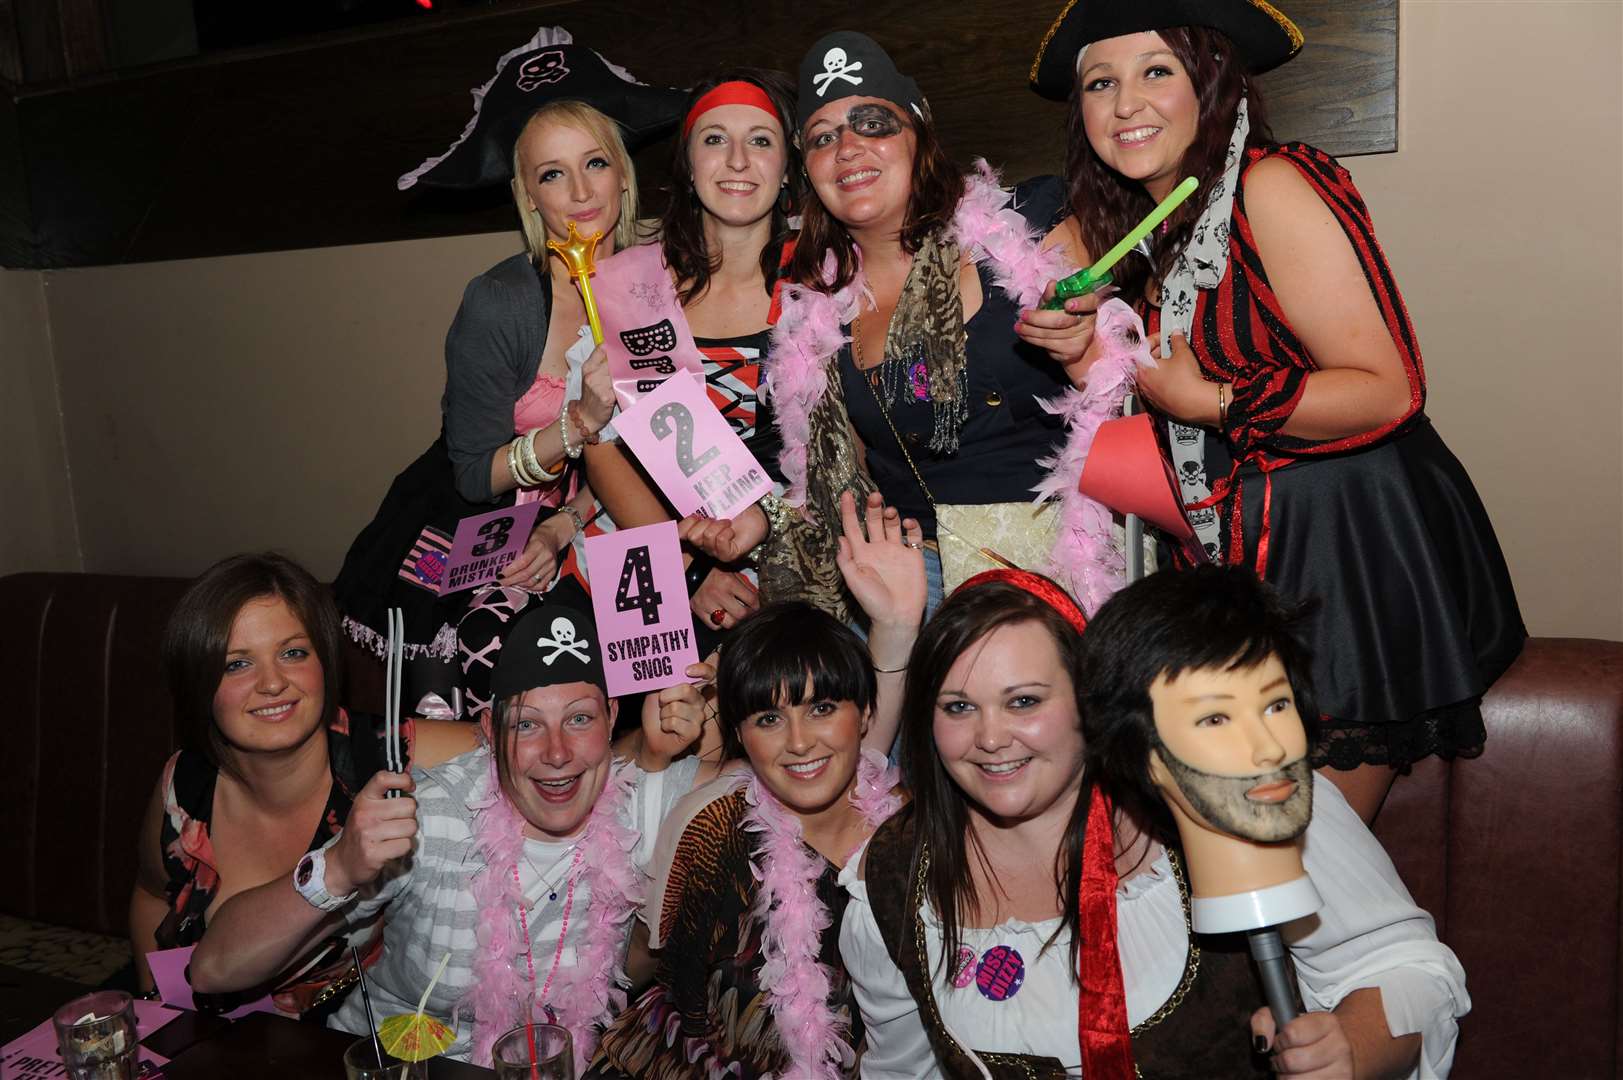 See Copy by: .Cityseen..20th August 2011.Pirate theme hen night for Louise Coull (back 2nd left) with her crew at Smith n Jones.,....Pic by: Gary Anthony.SPP Staff Photographer.New Century House.Longman Road.Inverness.Tel: 01463 233059.